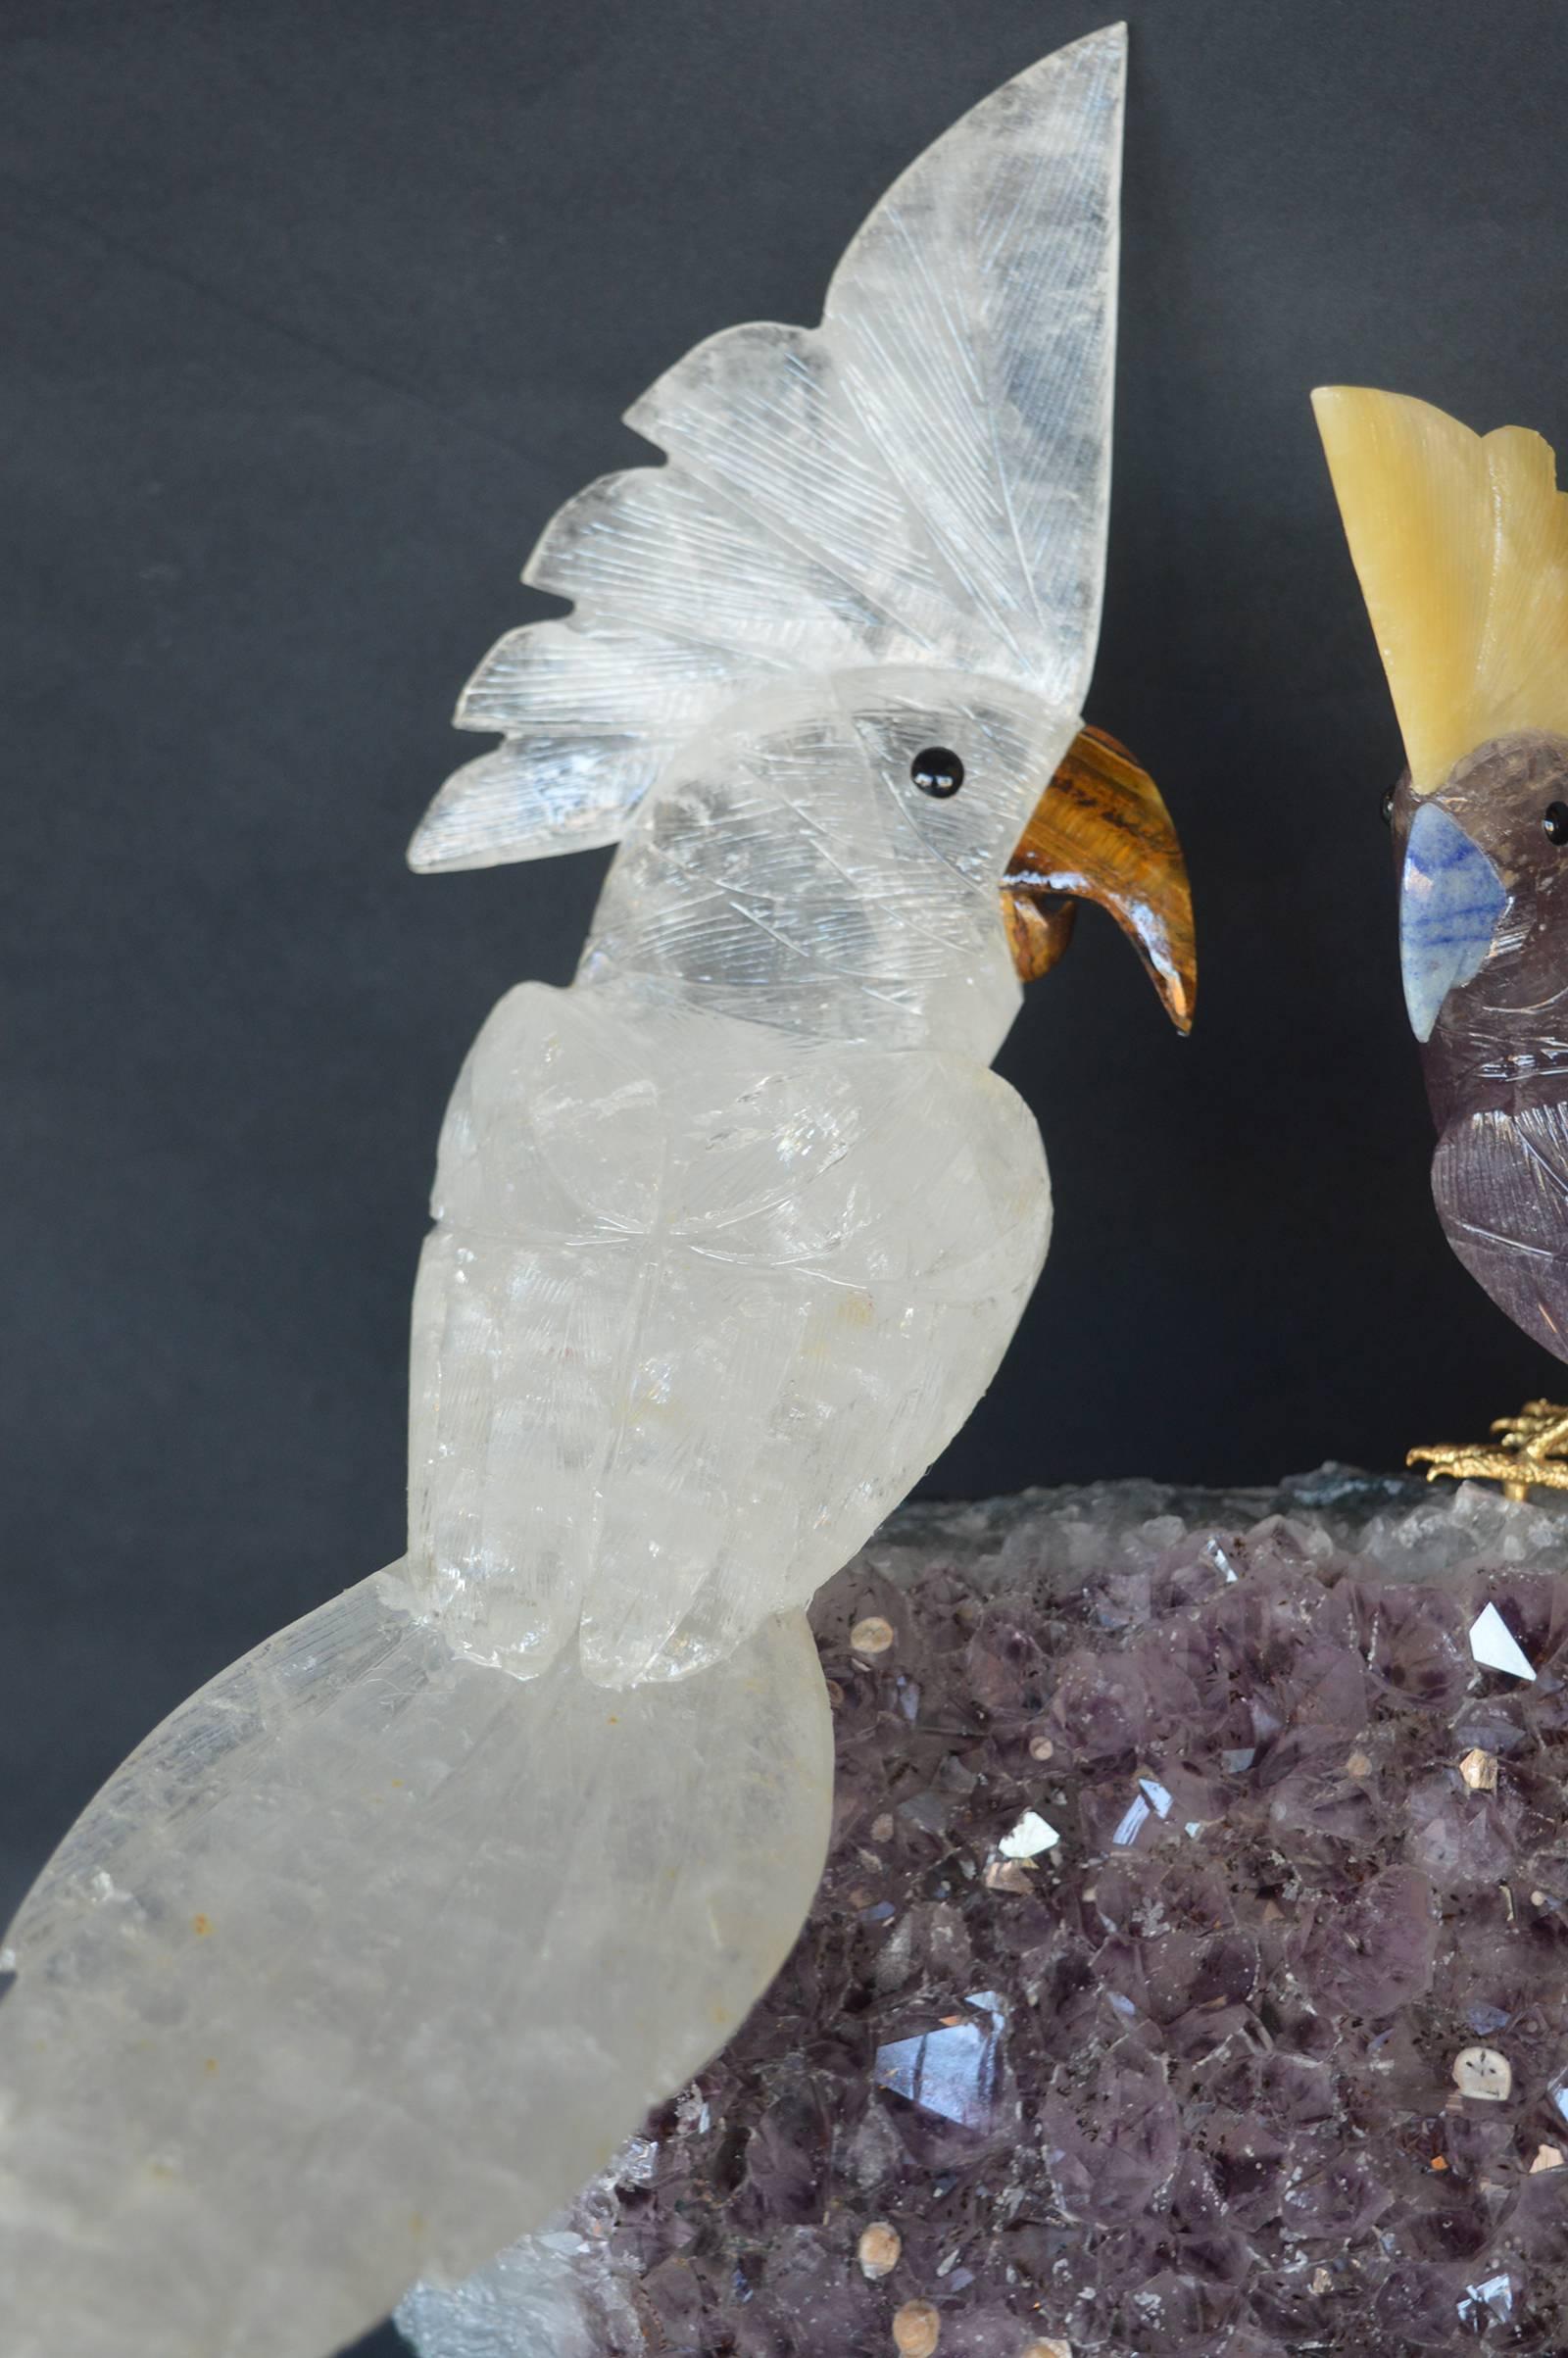 Rock crystal and quartz with tiger eye birds perched on a piece of quartz.